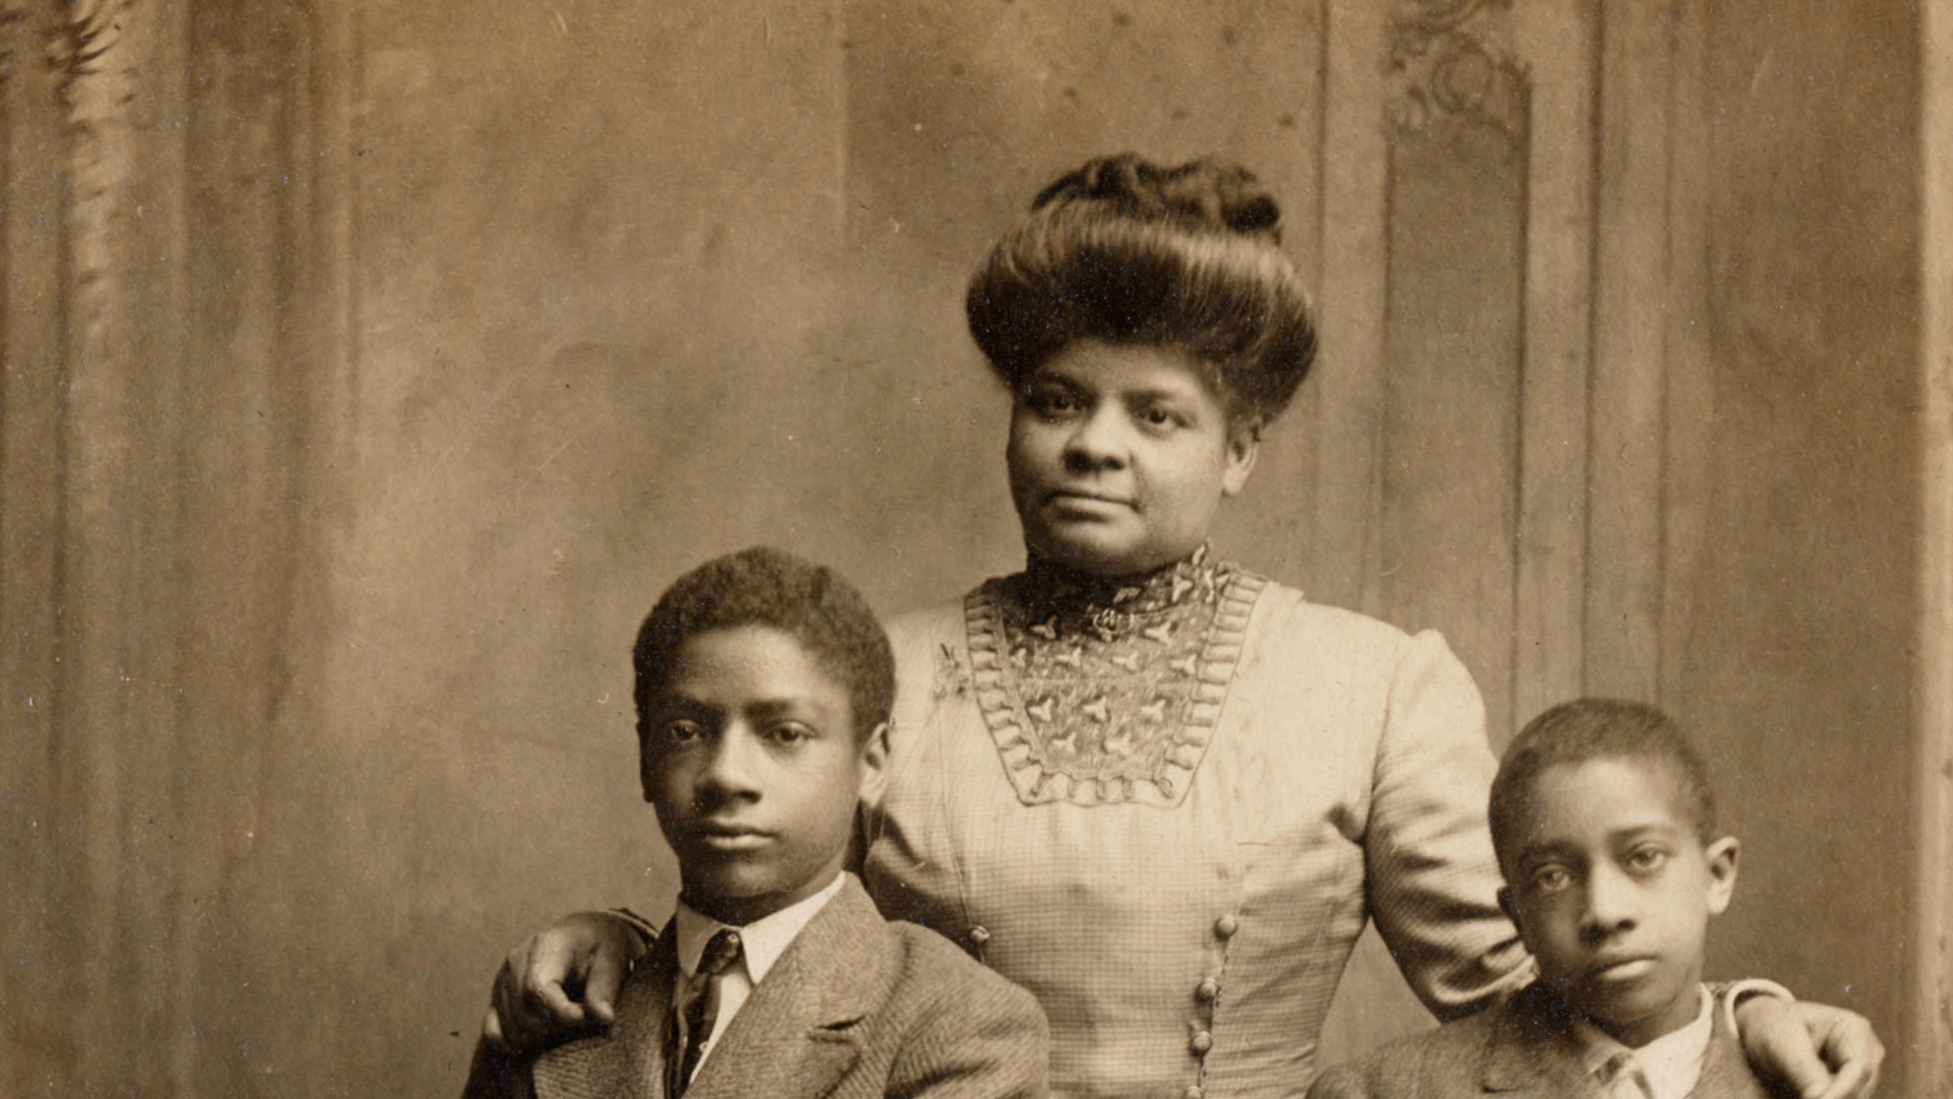 Ida B. Wells with her children. From the left: Charles; Ida, Jr.; Alfreda; and Herman. Photo Credit: University of Chicago Photographic Archive, apf1-08624, Hanna Holborn Gray Special Collections Research Center, University of Chicago Library